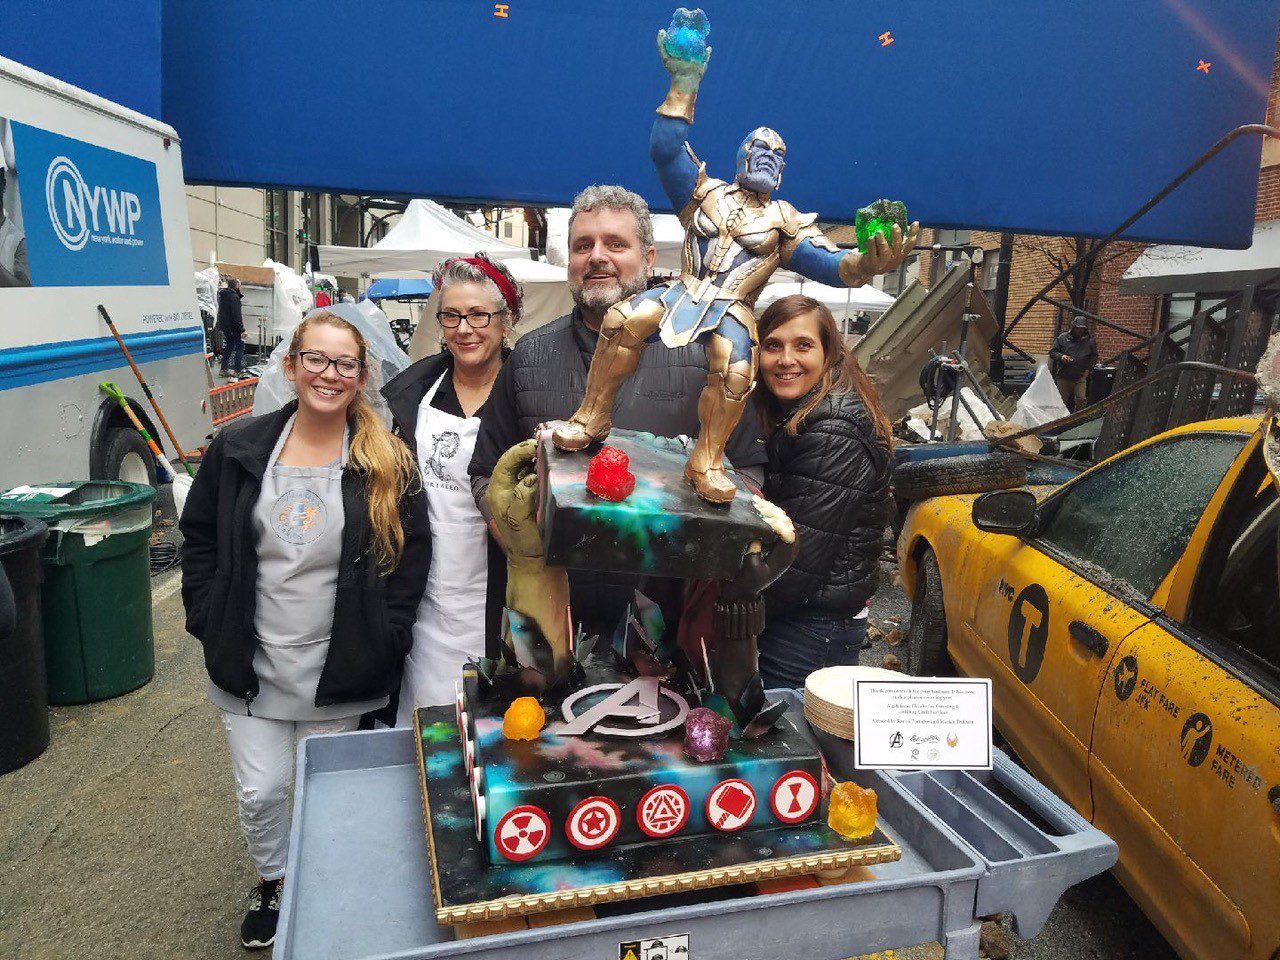 A group of people standing around a cake.